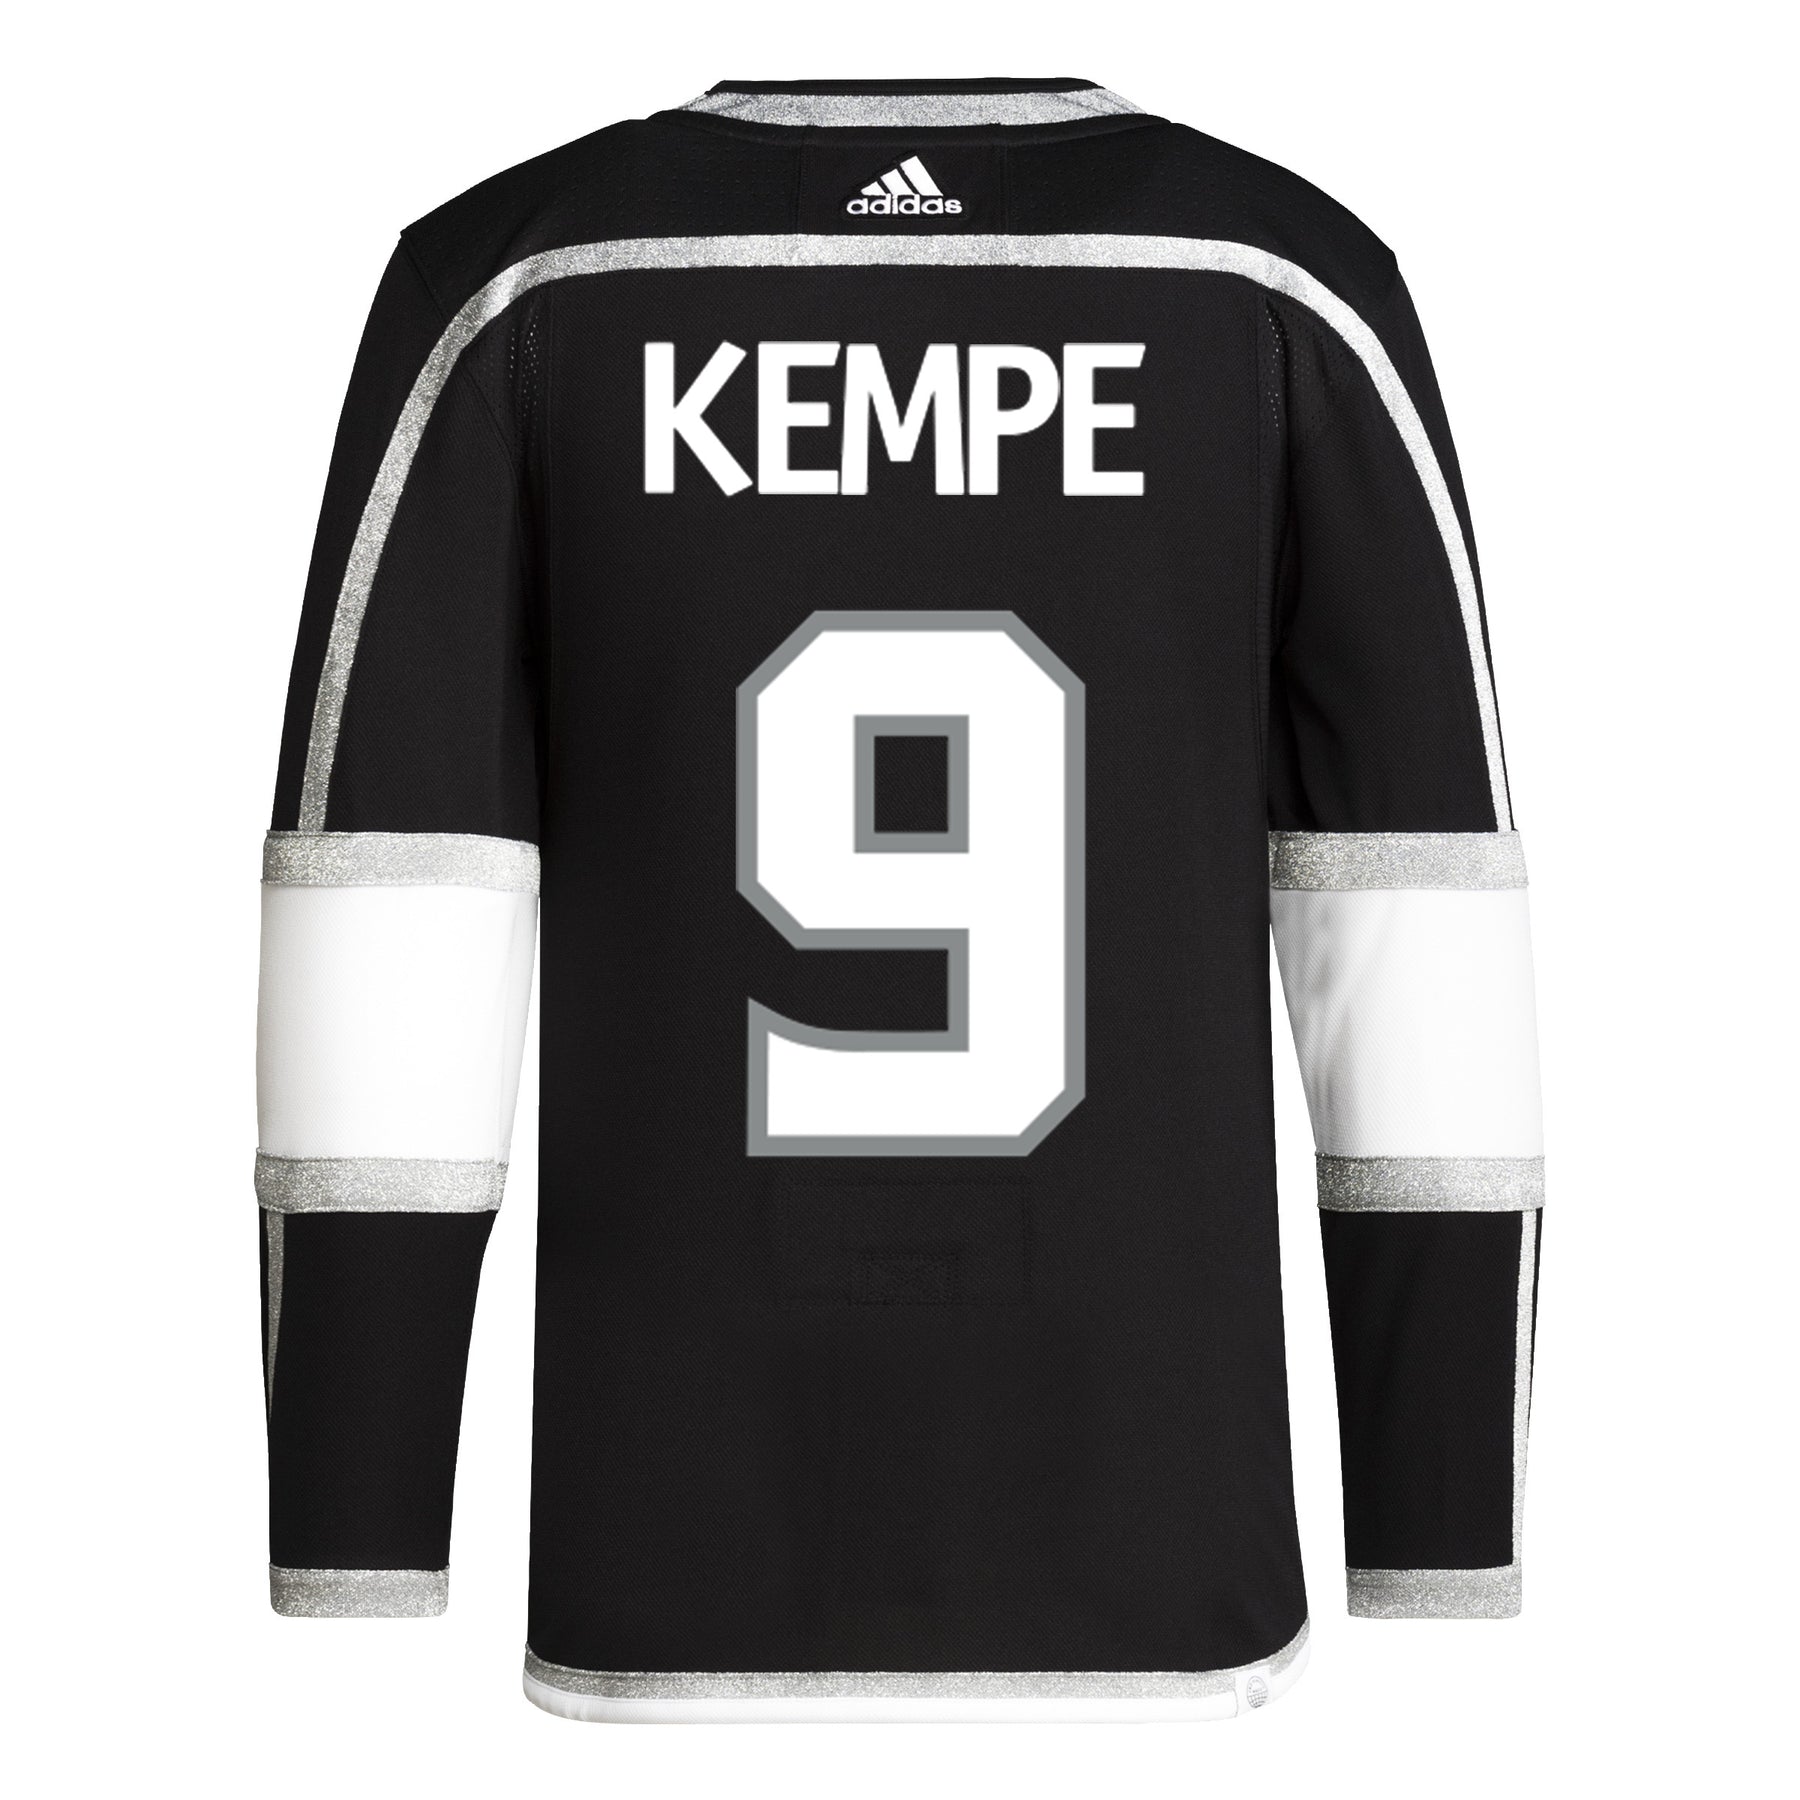 Los Angeles Kings: Adrian Kempe 2021 - Officially Licensed NHL